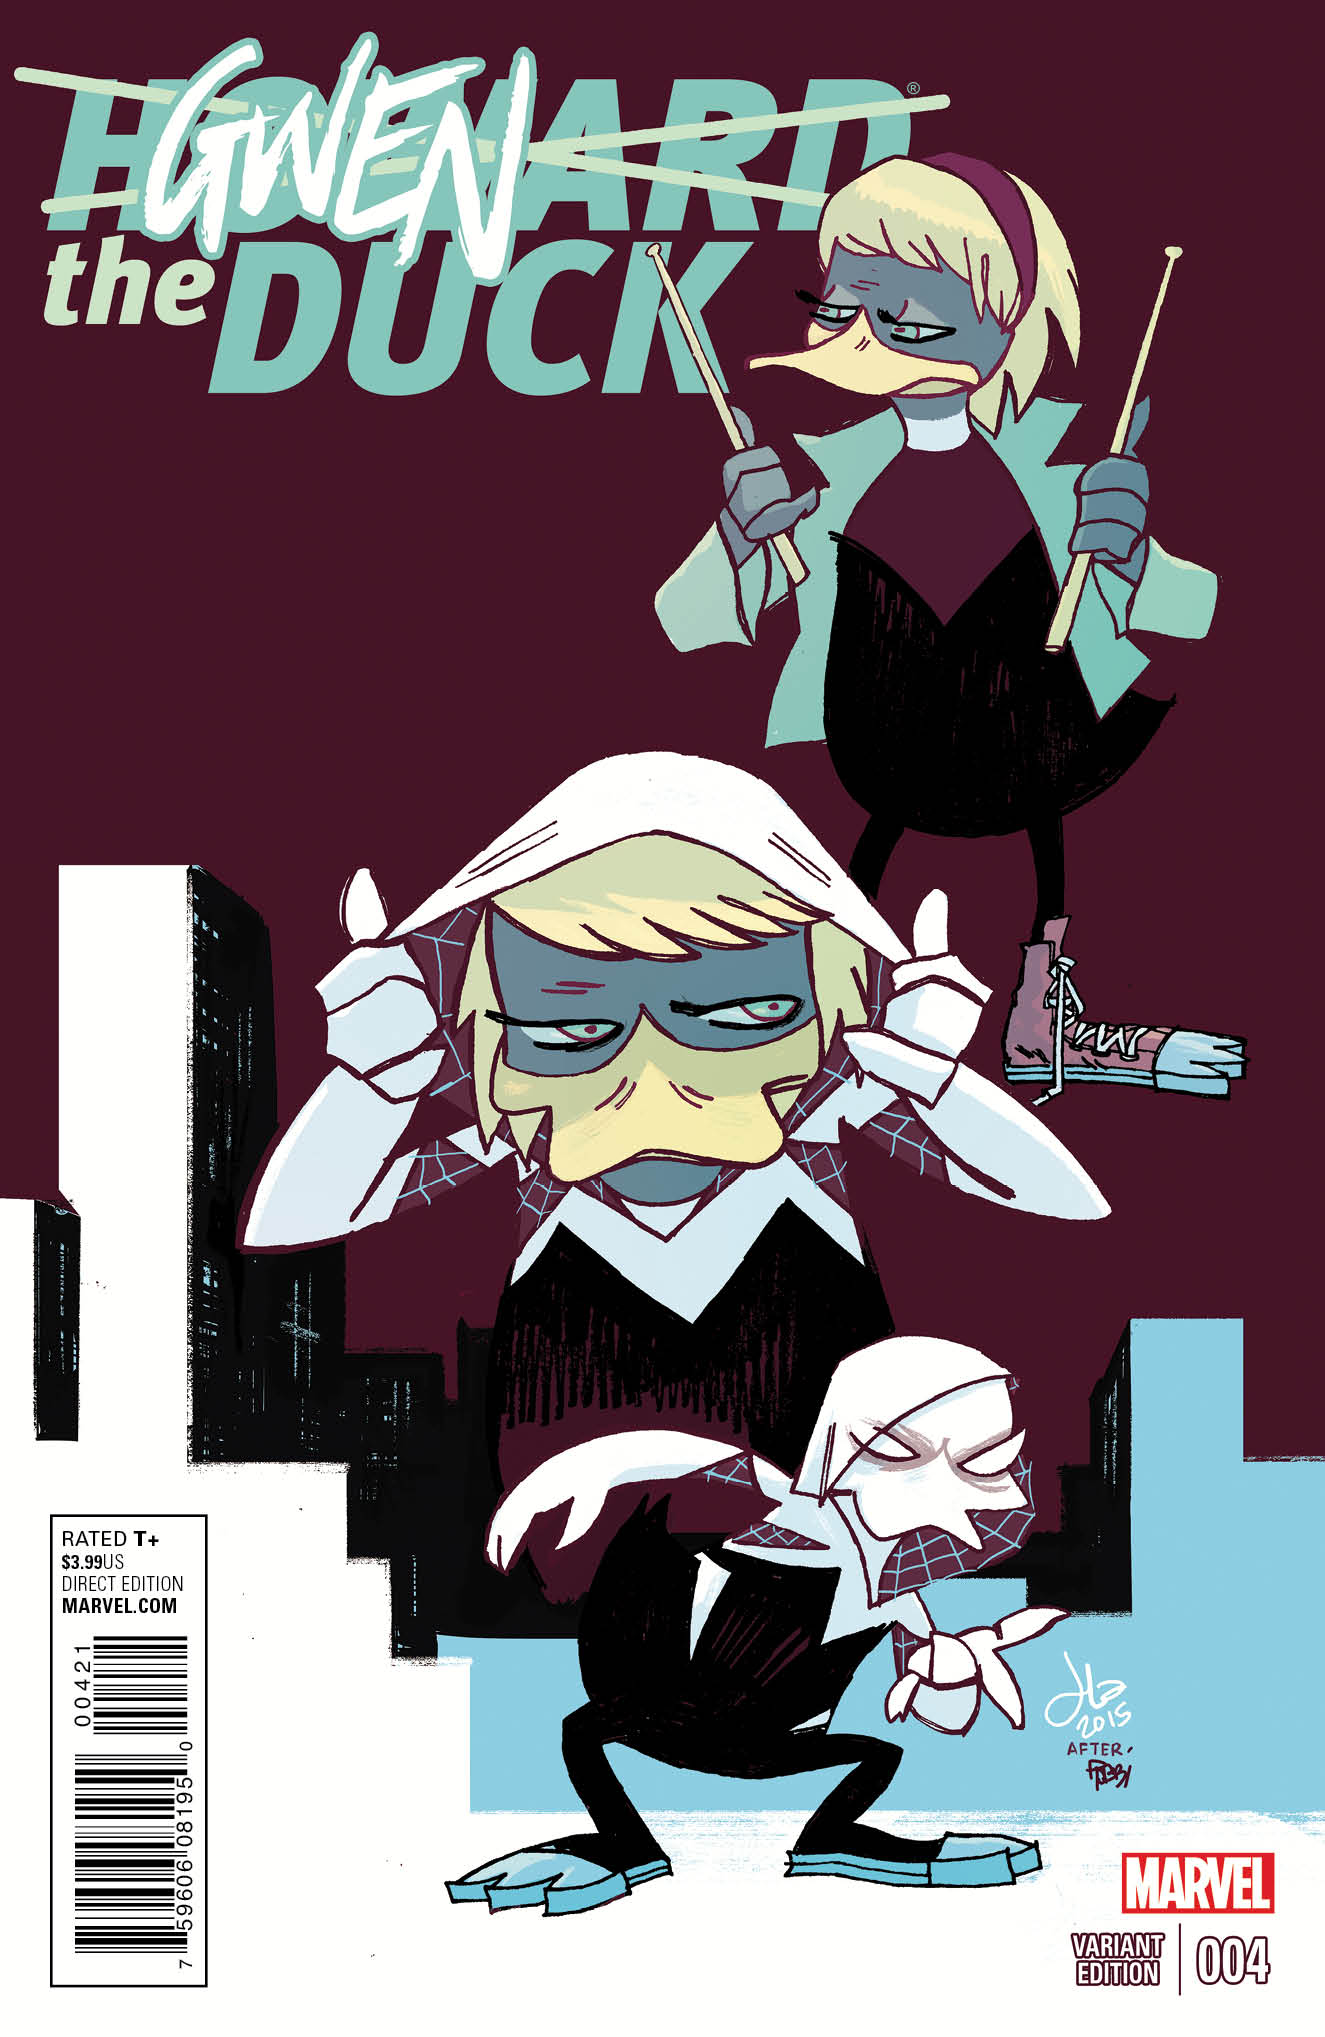 Howard the Duck (2015) #4 (Latour Gwen the Duck Variant)